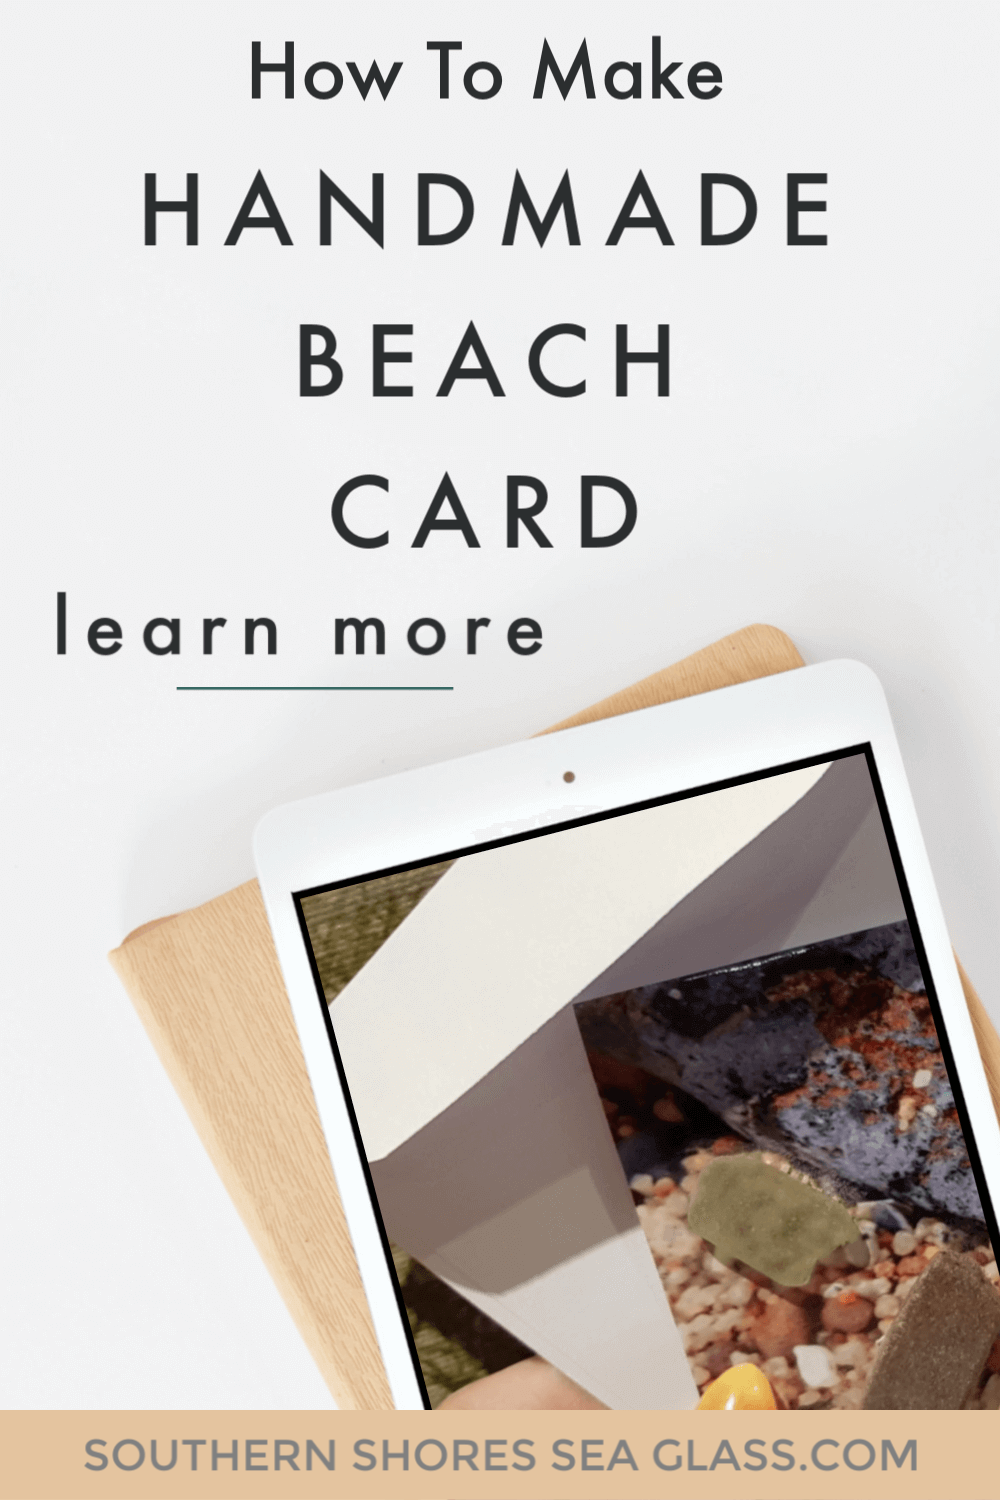 Create this easy to make Beach Card for your special friend or relative, using natural materials such as sand, sea glass and shells, add your own special words